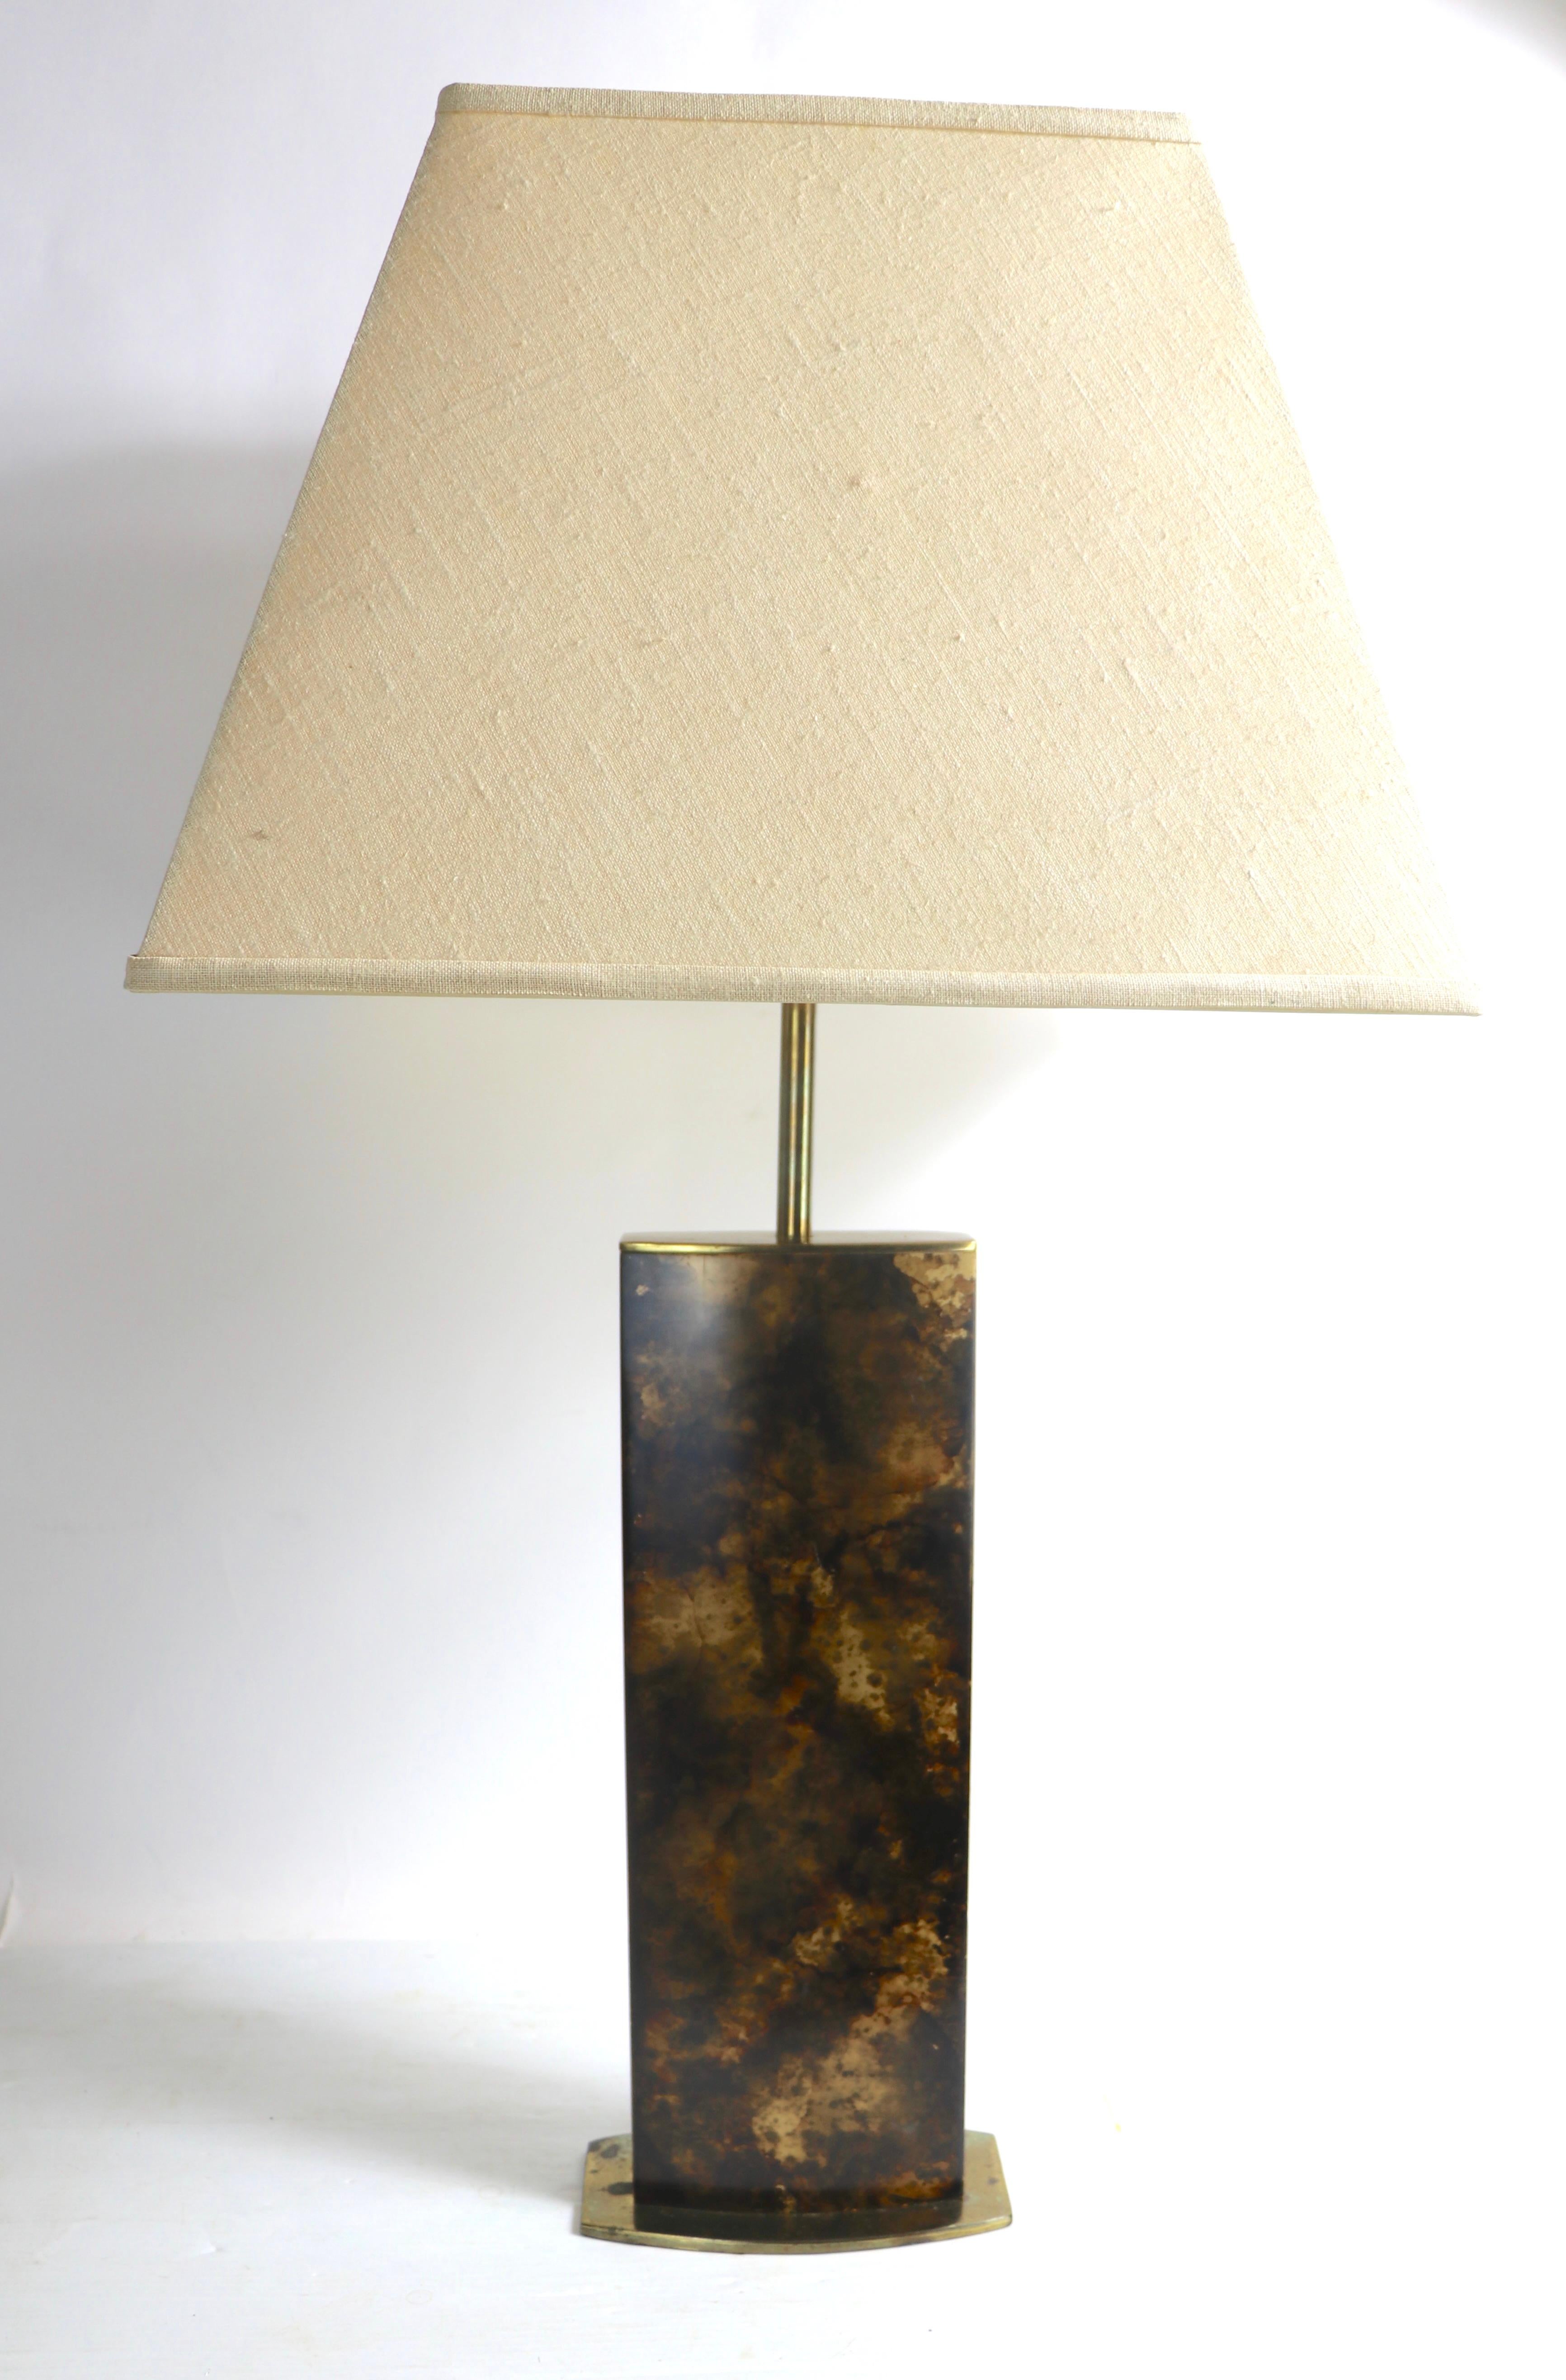 20th Century Faux Tortoise Shell Finish Table Lamp by Mutual Sunset Lamp Manufacturing Co. For Sale